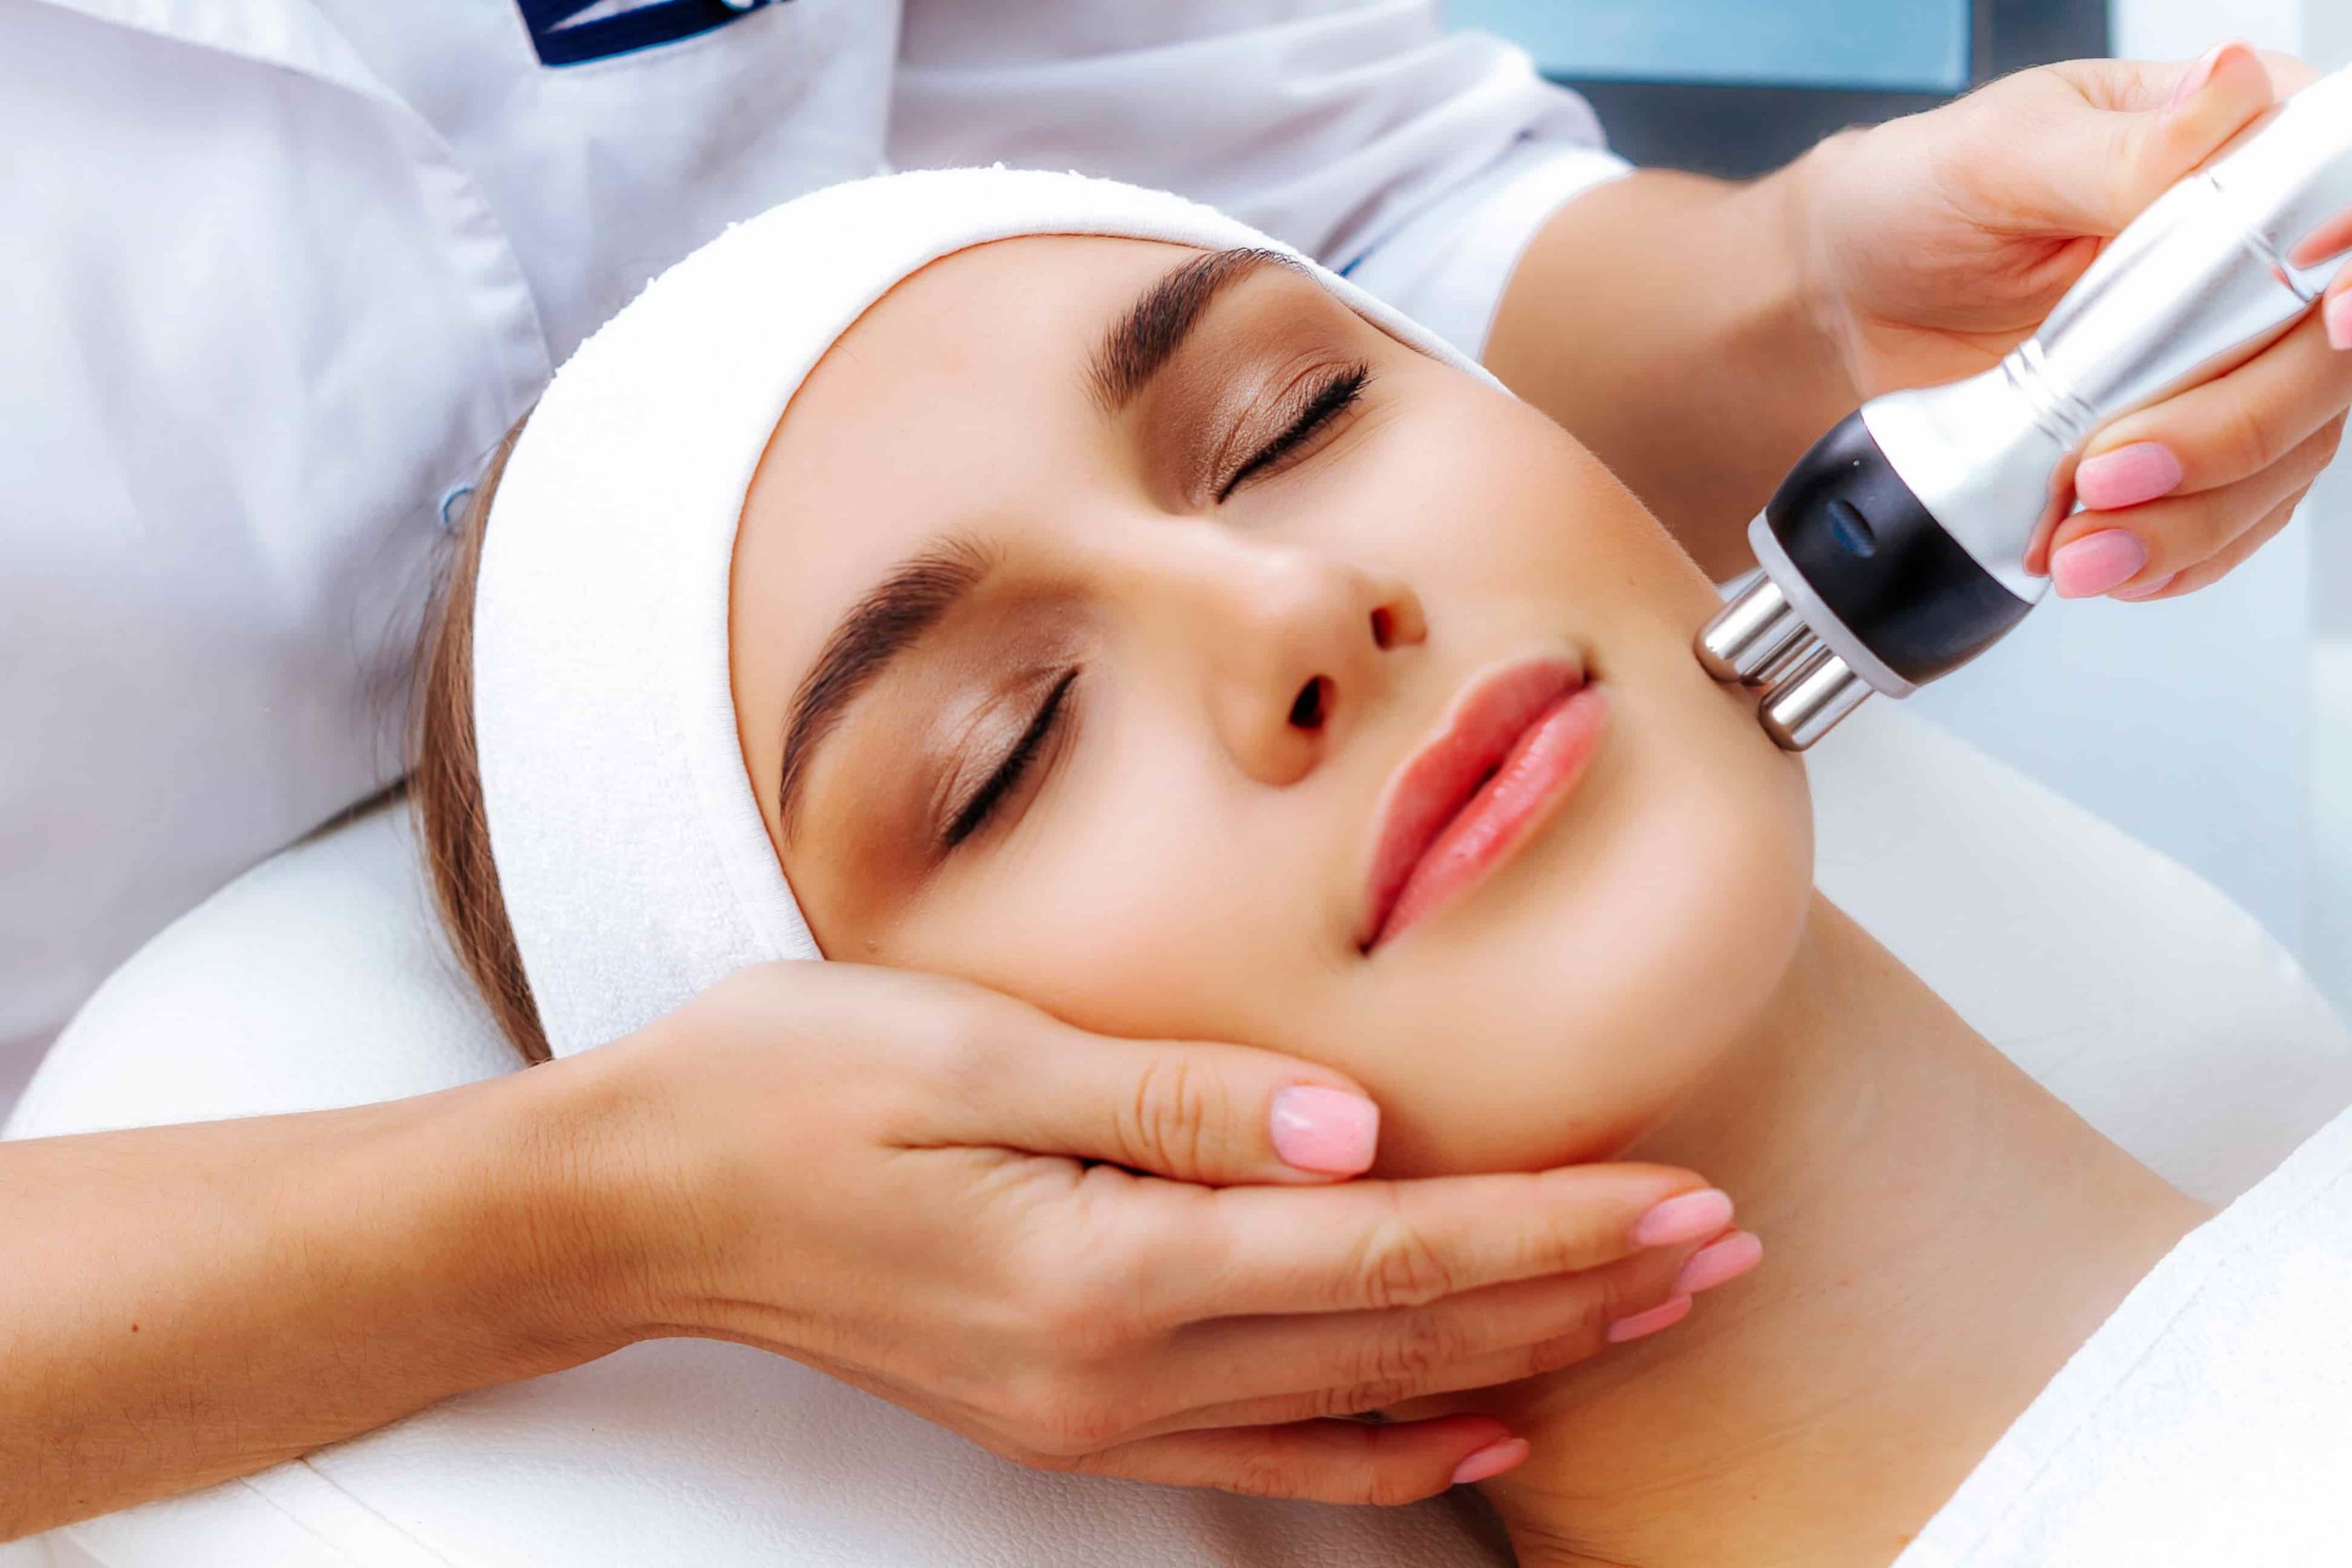 How does photorejuvenation work, and is it effective